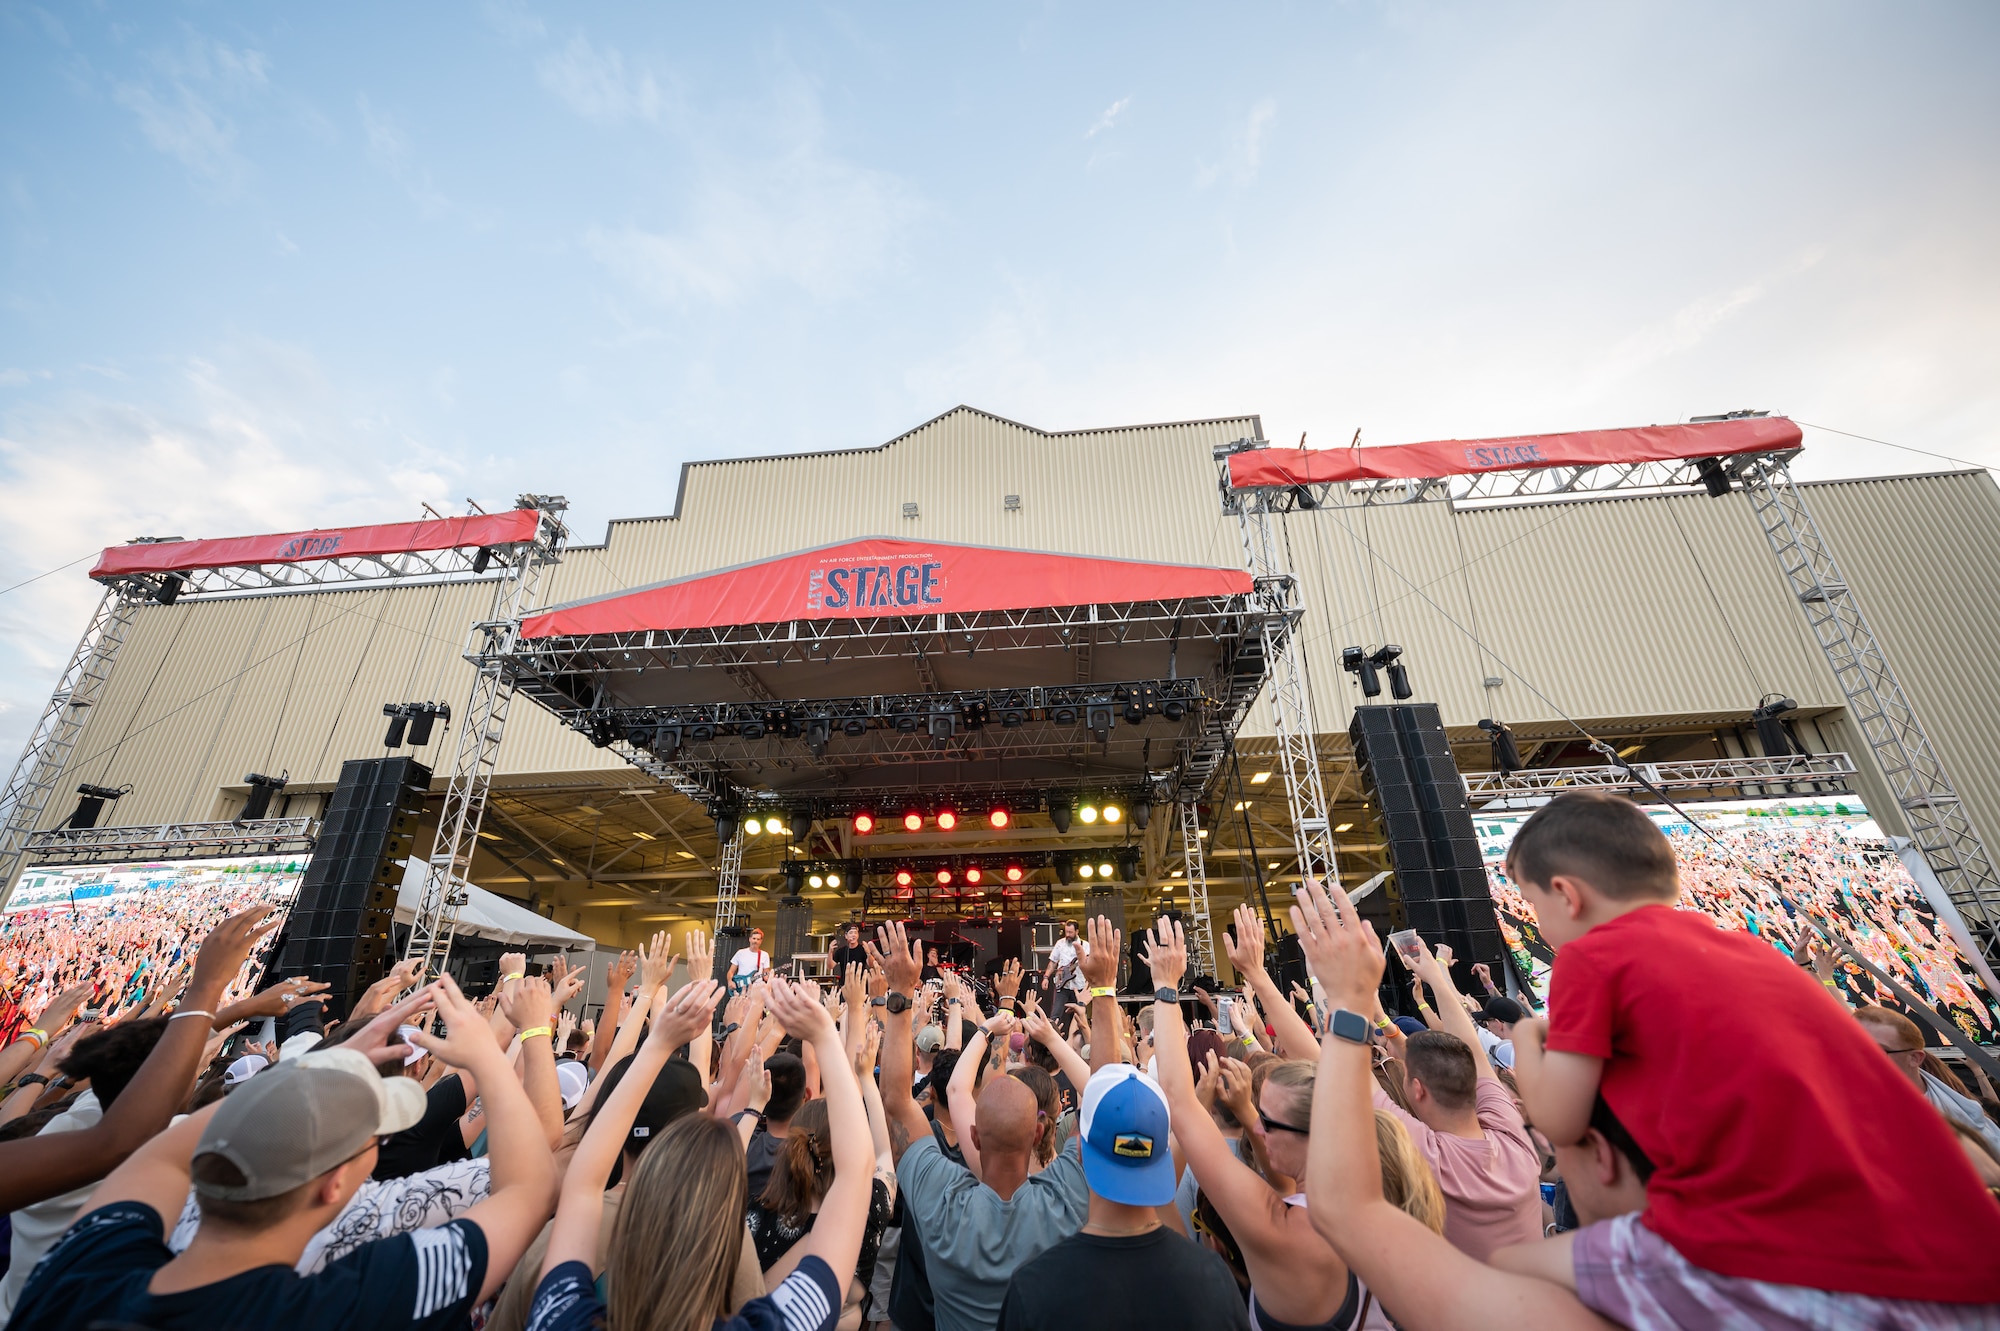 Audience members put their hands in the air during a song played by the rock band Hoobastank at Rock Fest Aug. 20, 2022, at Malmstrom Air Force Base, Mont.